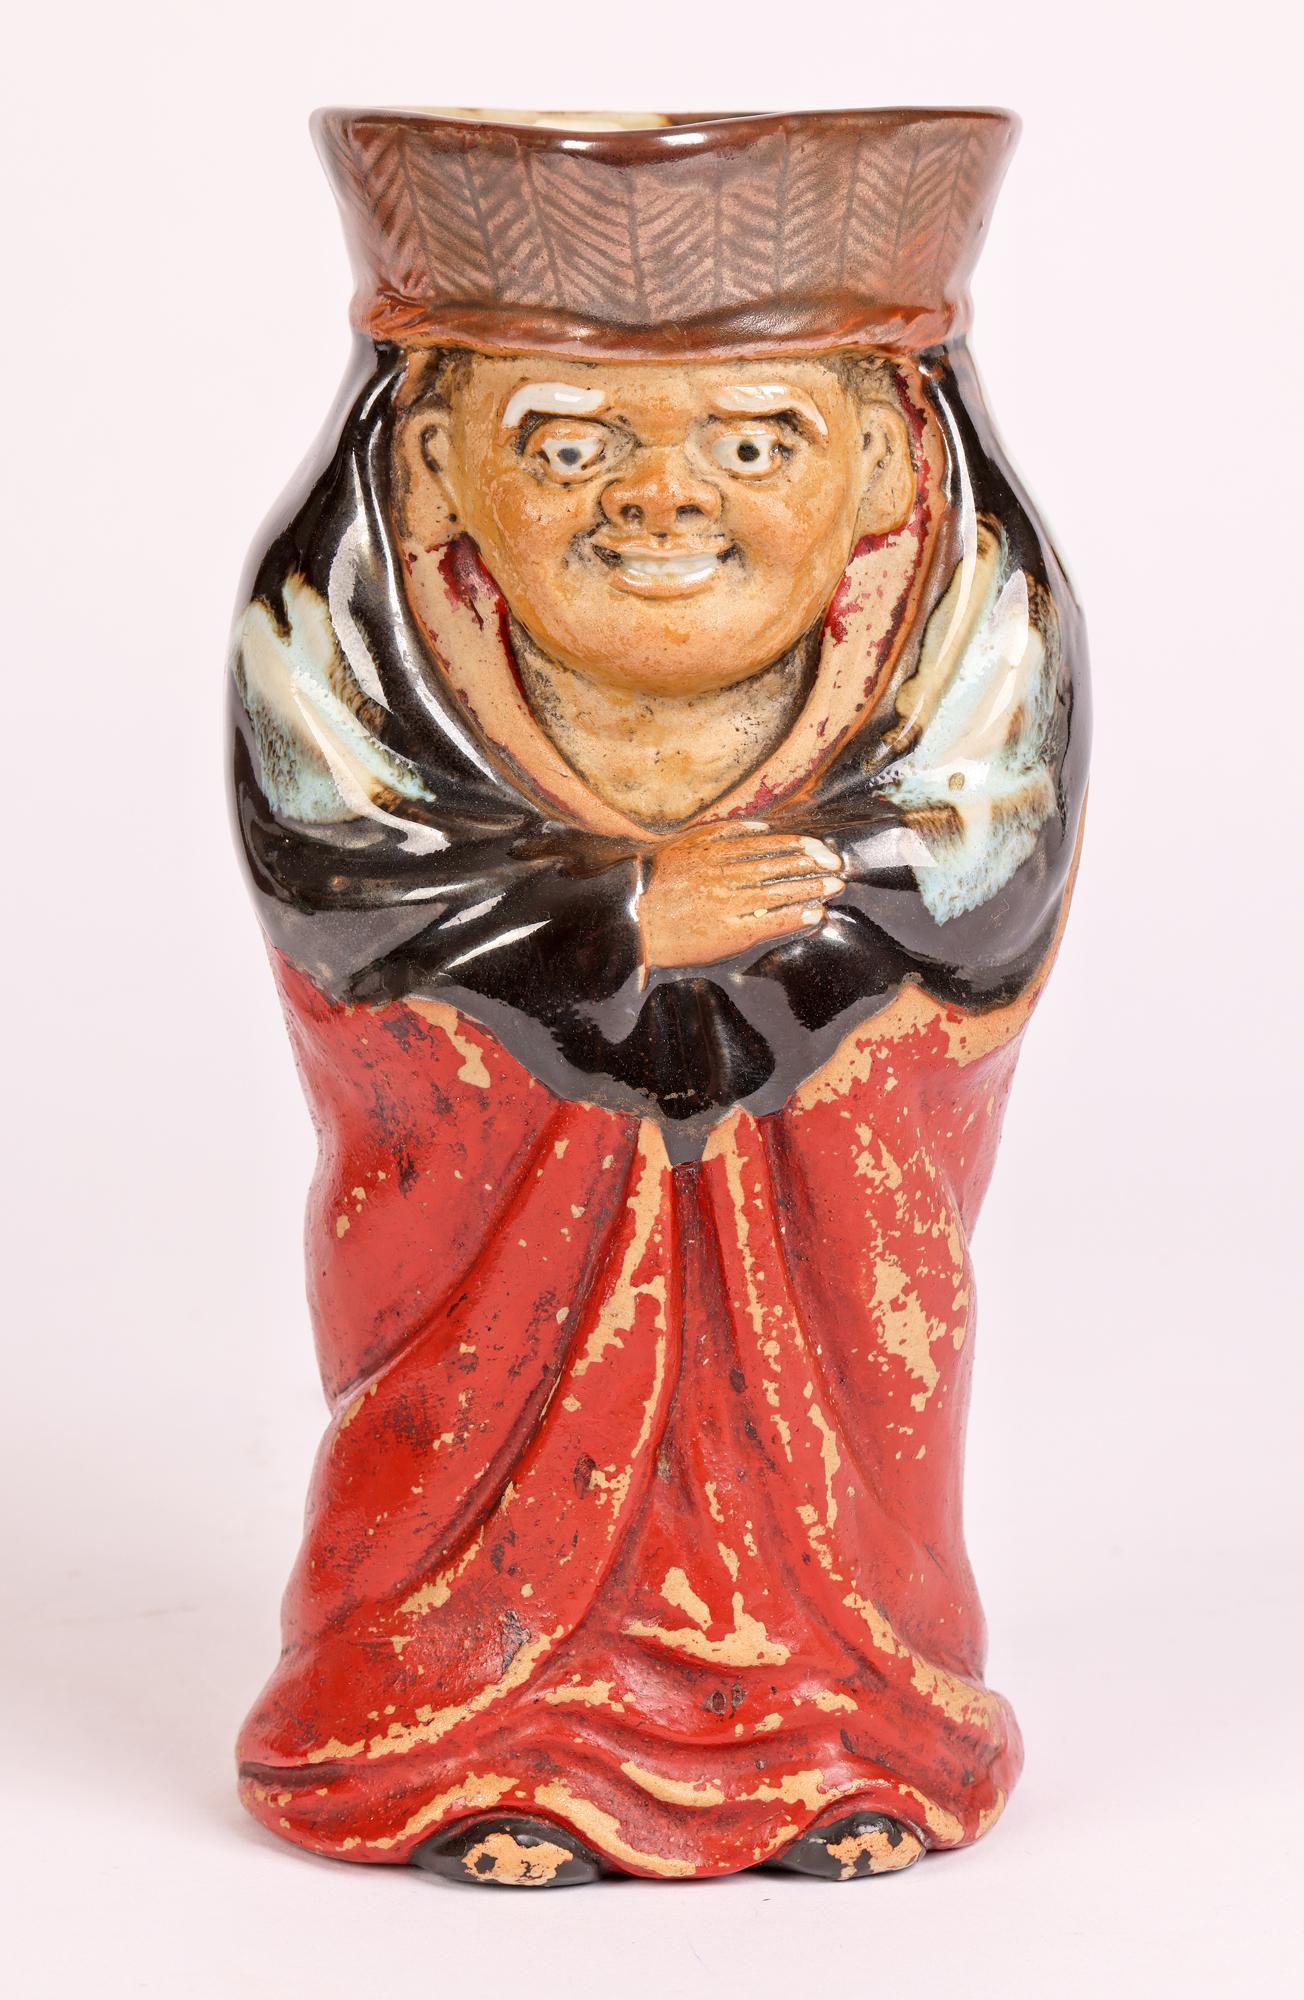 Inoue Ryosai Sumida Gawa Japanese Pottery Character Jug, c.1900 In Fair Condition For Sale In Bishop's Stortford, Hertfordshire